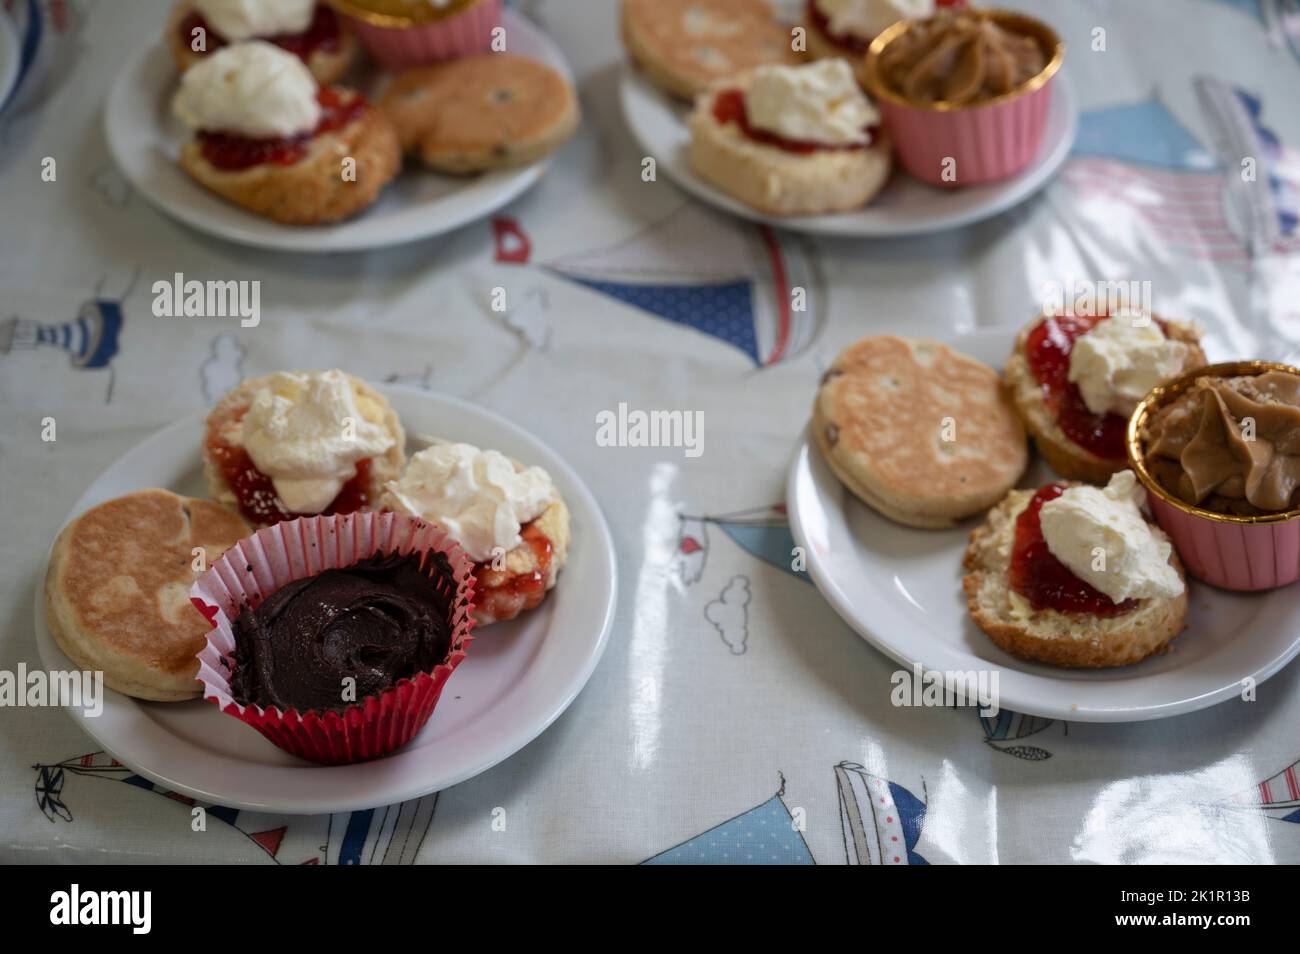 Wales, Pembrokeshire. Dale village. Cream tea in aid of local charity. Stock Photo